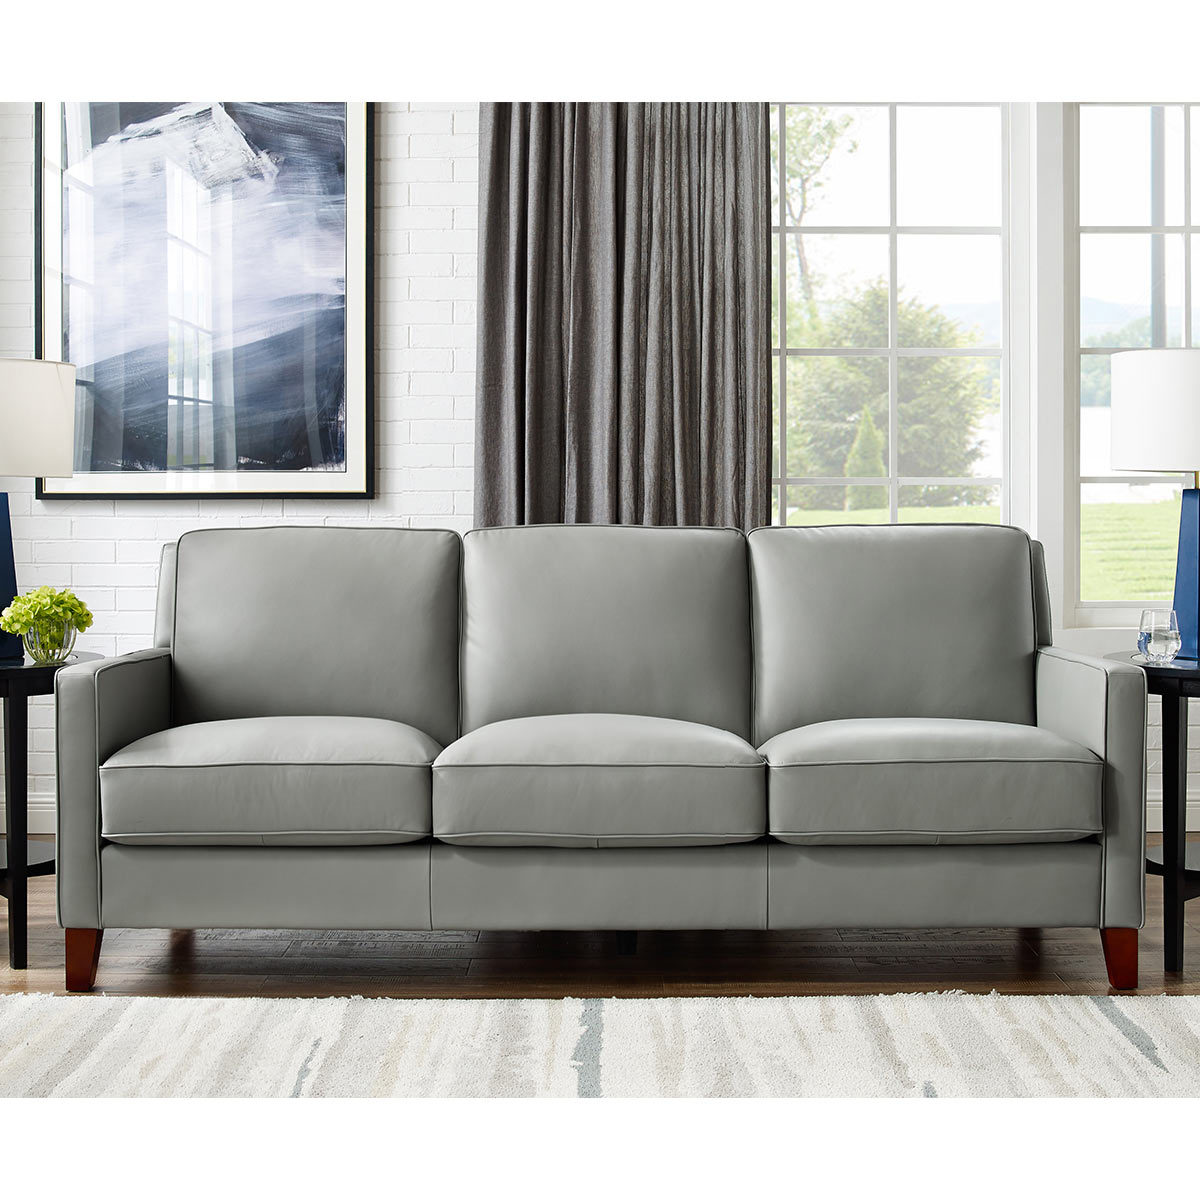 West Park 3 Seater Light Grey Leather Sofa Costco Uk - Leather Sofa With Removable Seat Cushions Uk